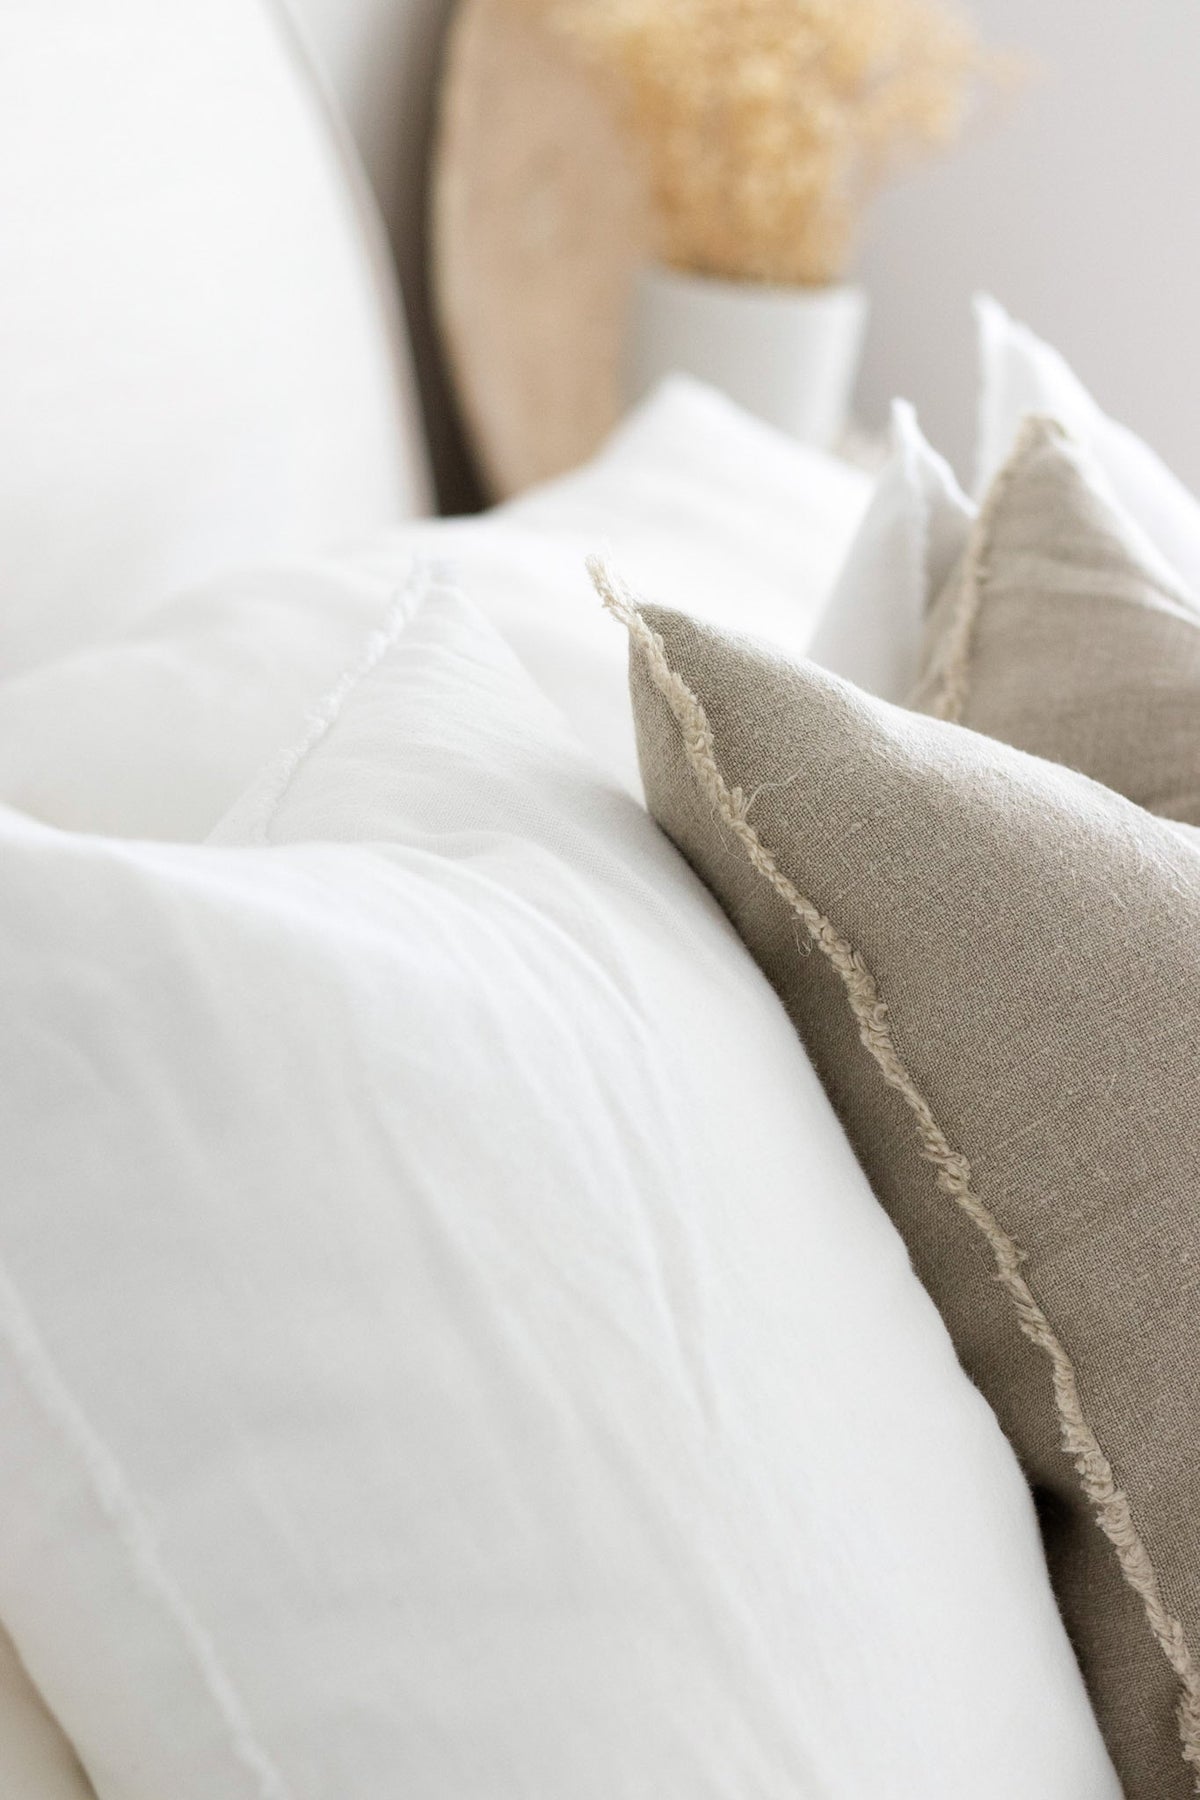 Thick heavy Linen Cushion cover 350gsm, white linen cushion cover with raw or embroidered edging. Stonewashed white quality linen available in neutral shades. White linen throwrug and cushions, Australia